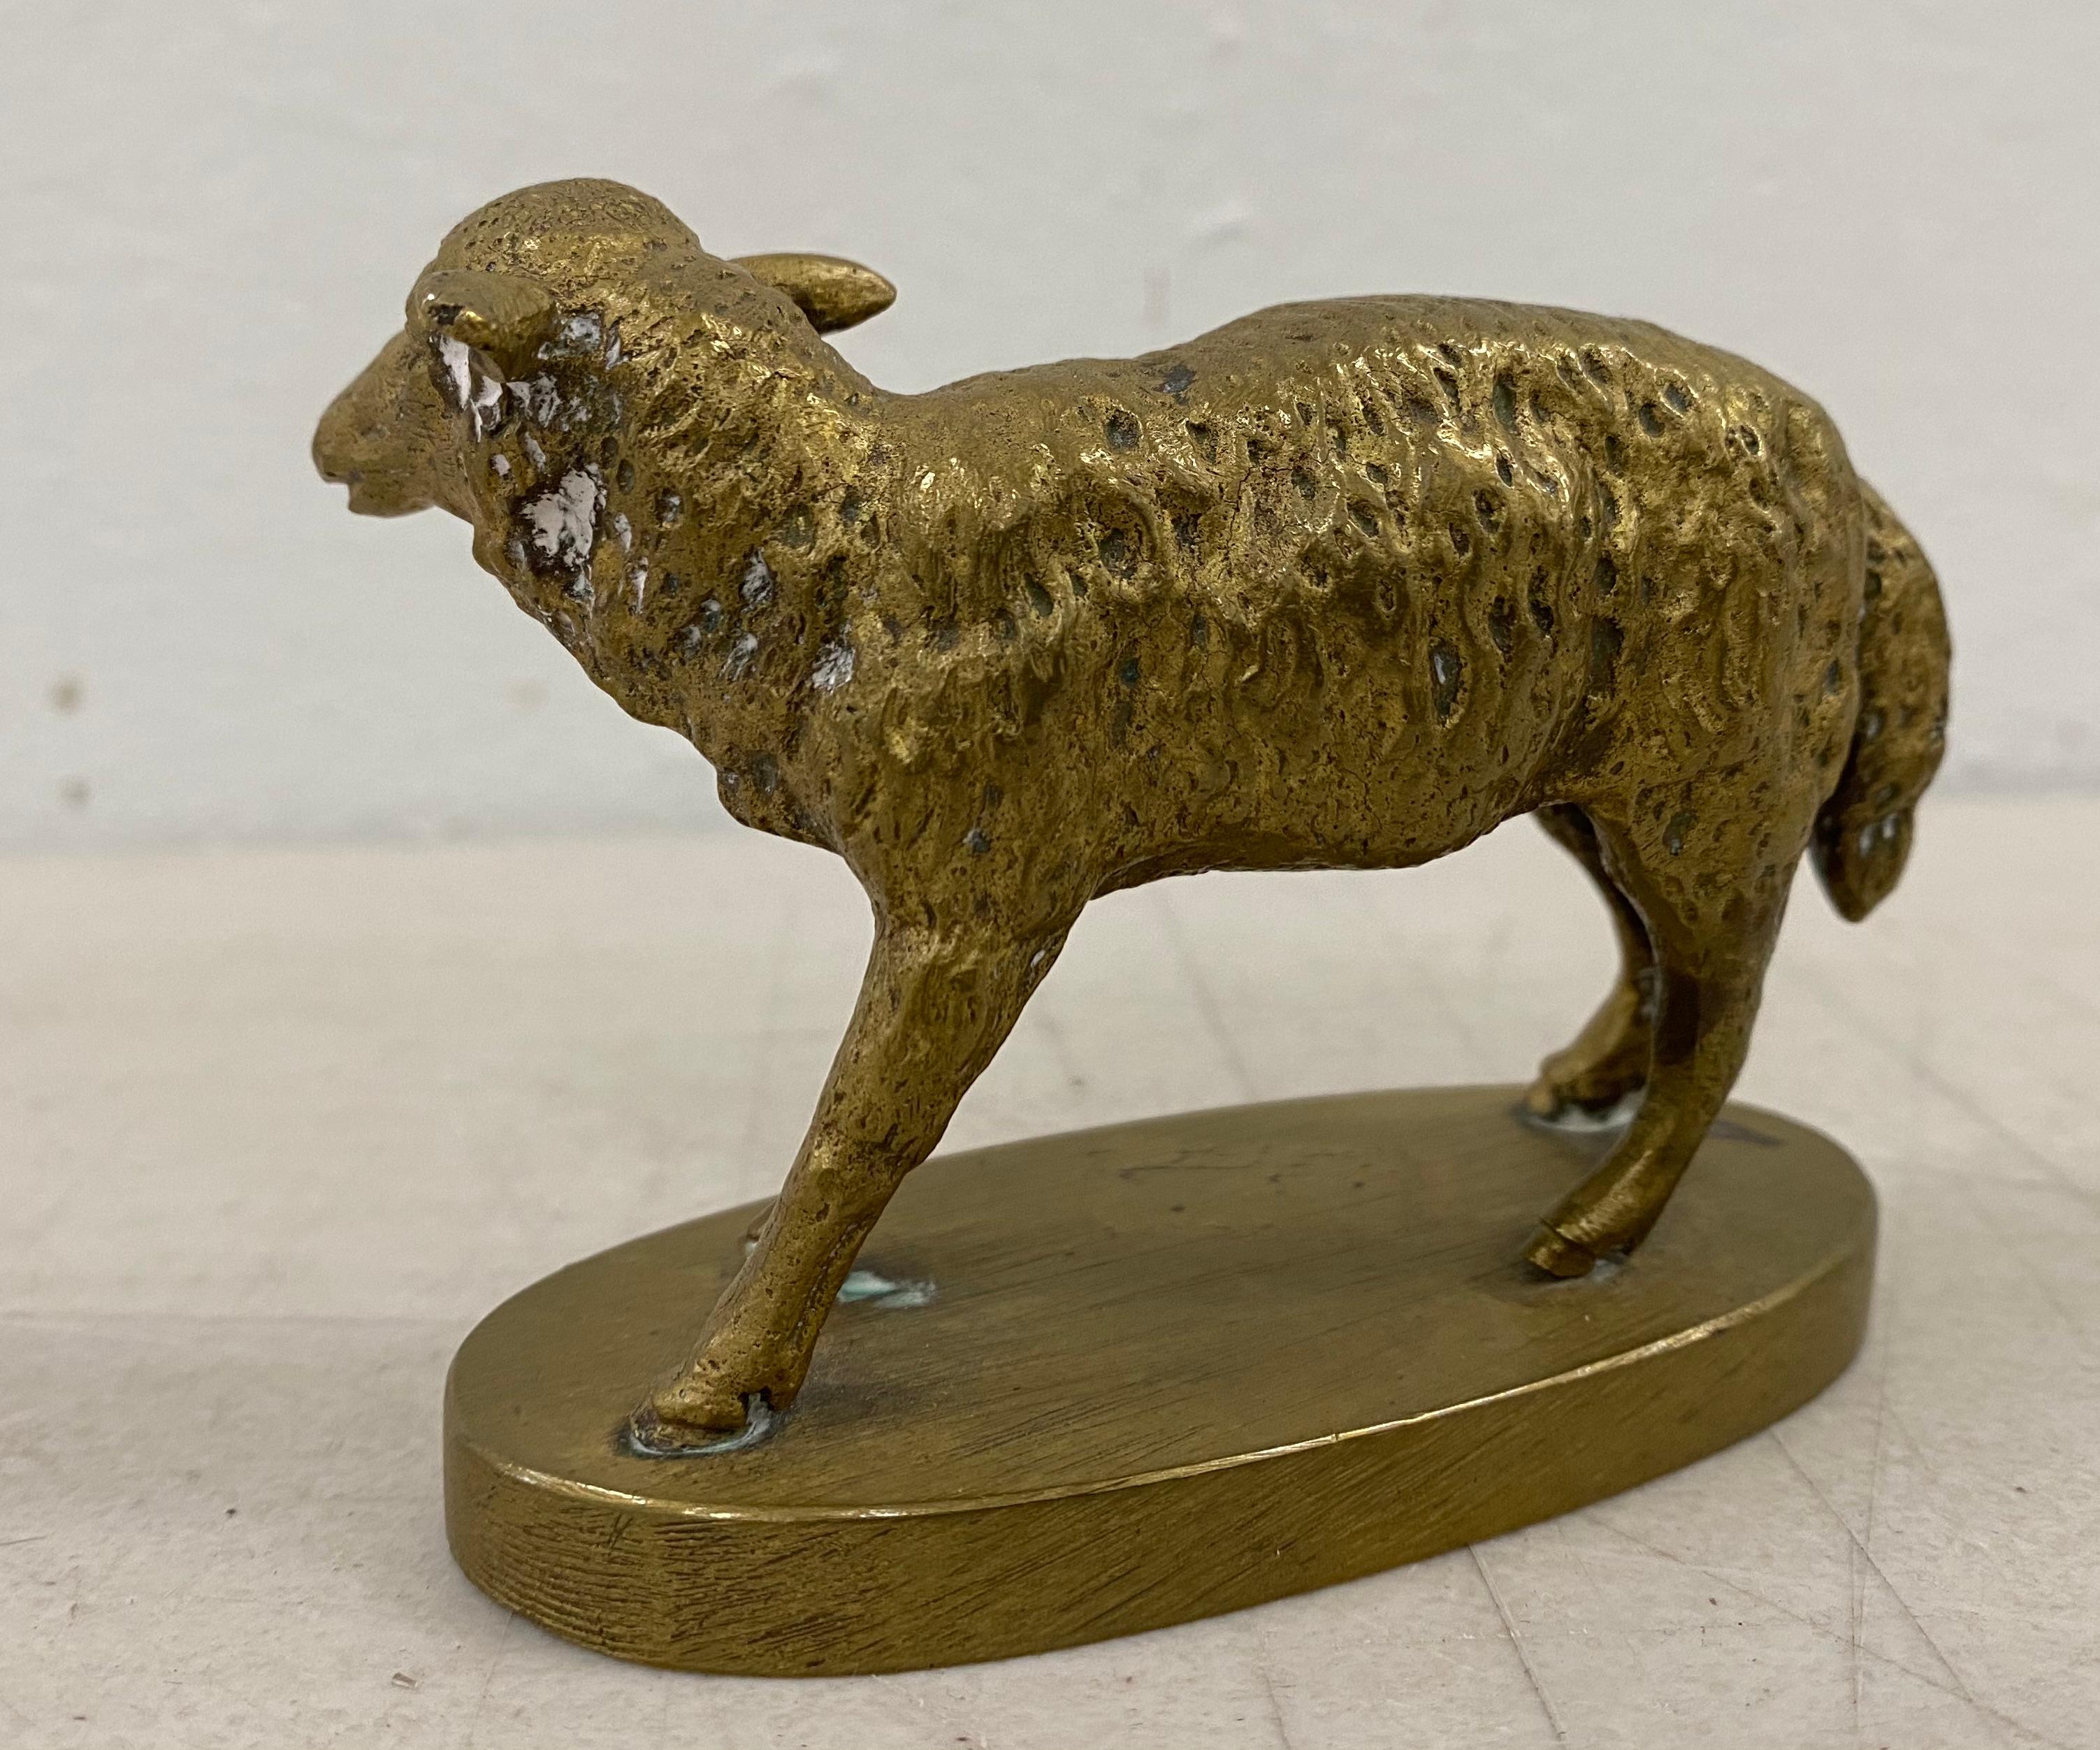 19th century cast bronze miniature sheep

A fine bronze sculpture with no visible signature or makers mark

Measures: 4